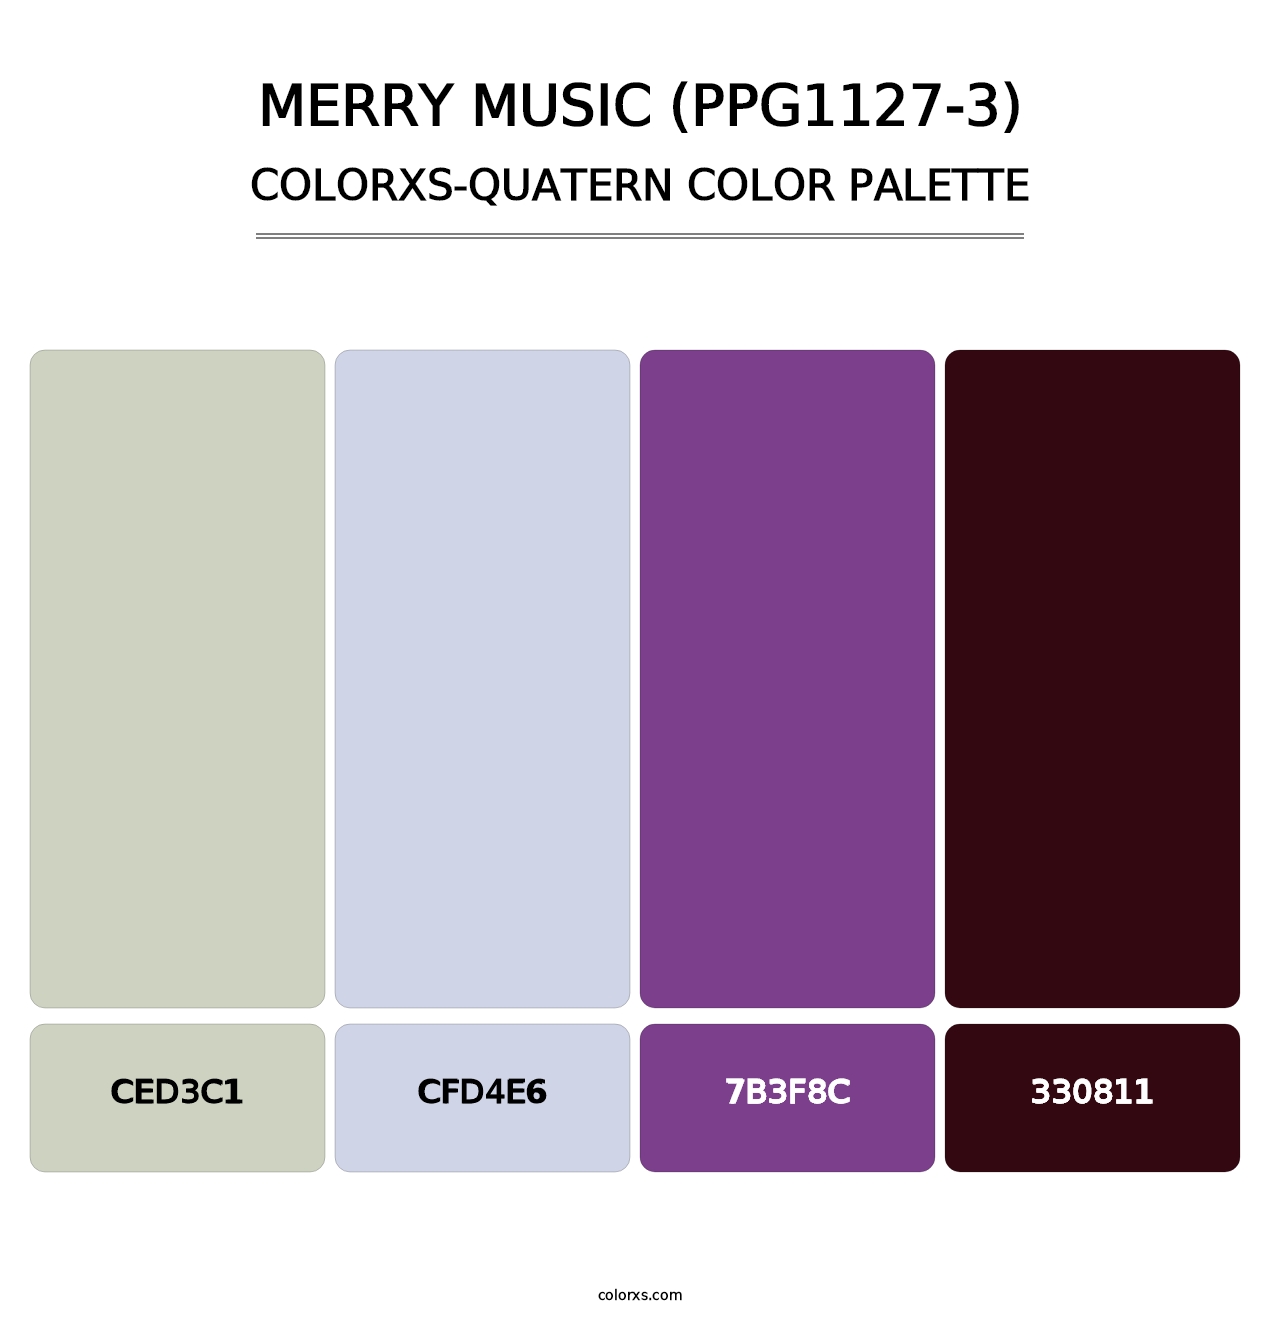 Merry Music (PPG1127-3) - Colorxs Quatern Palette